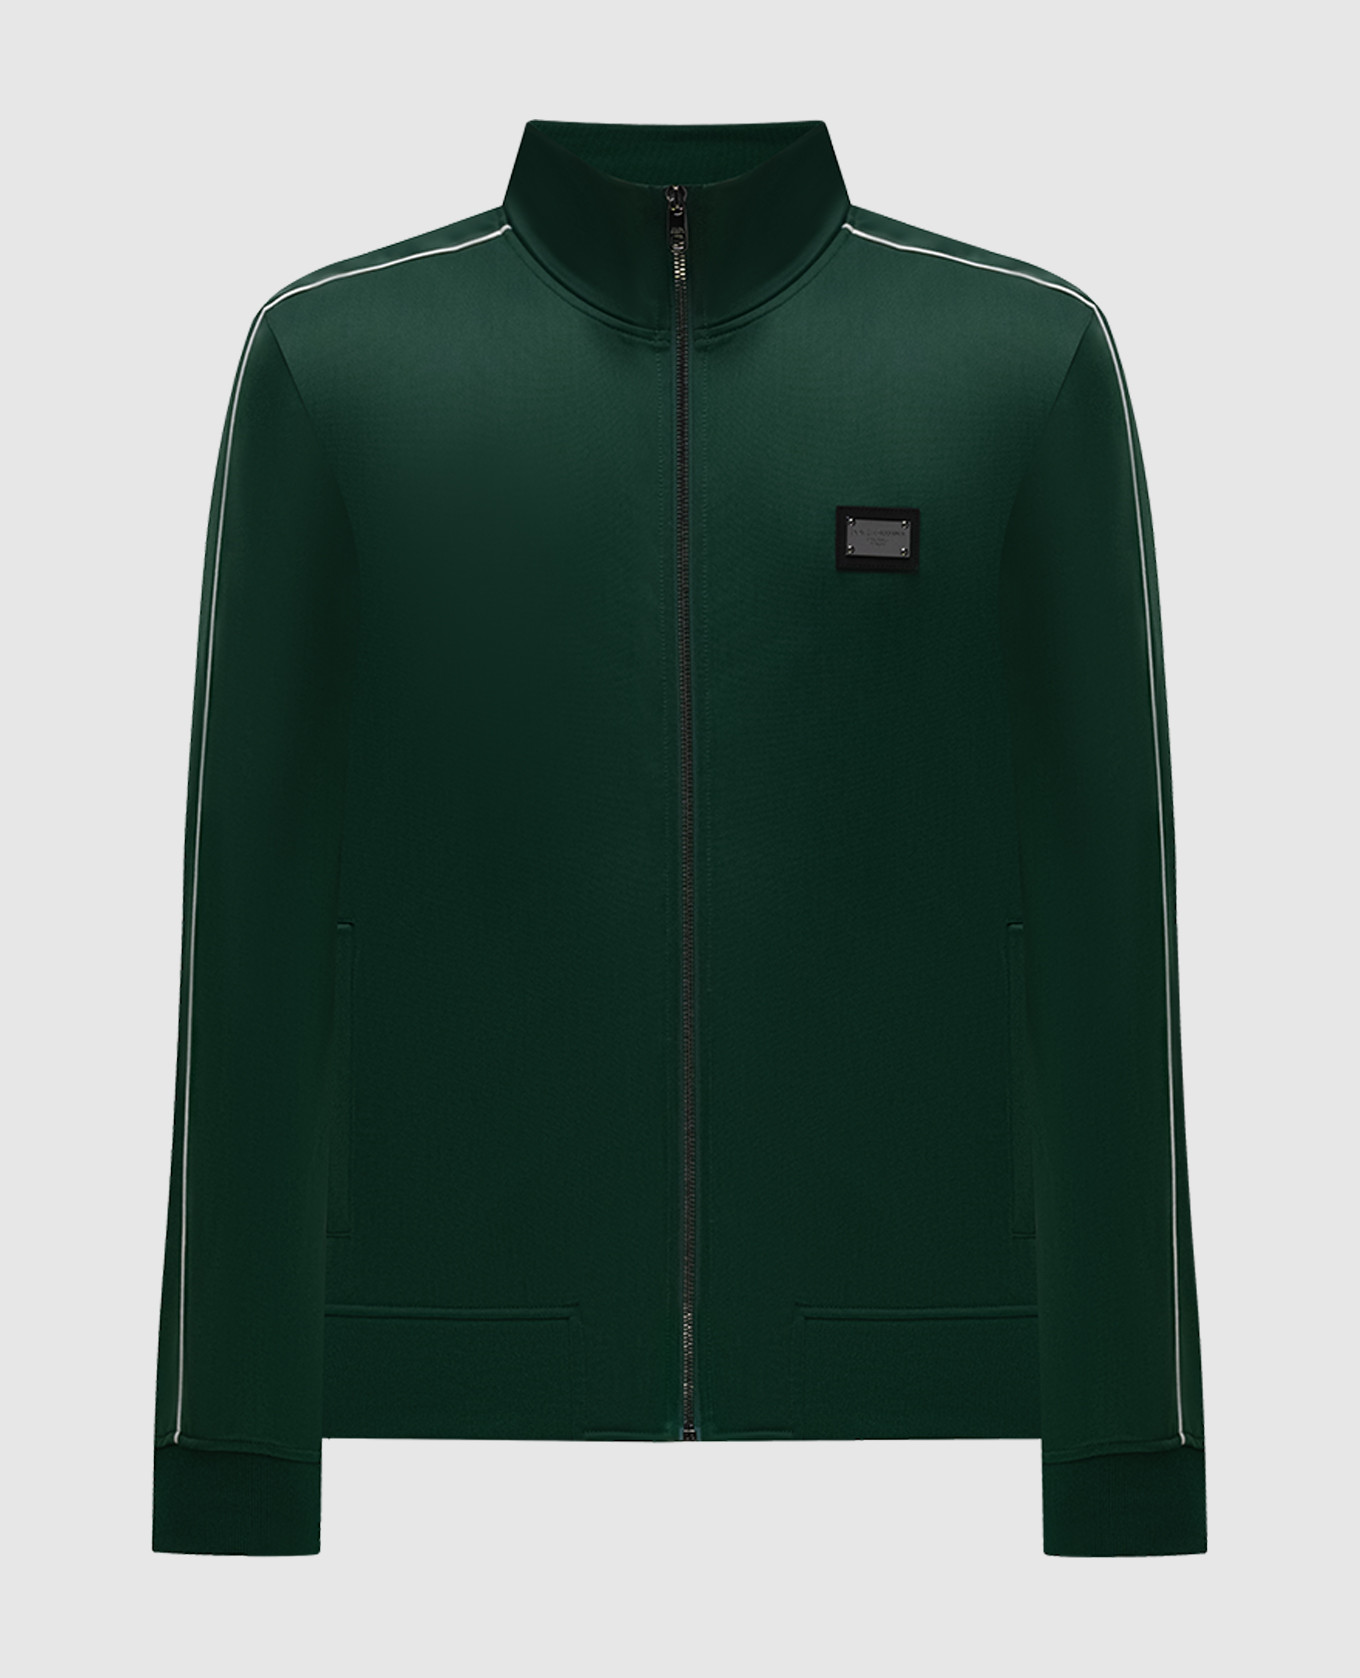 Green sports jacket with a logo patch